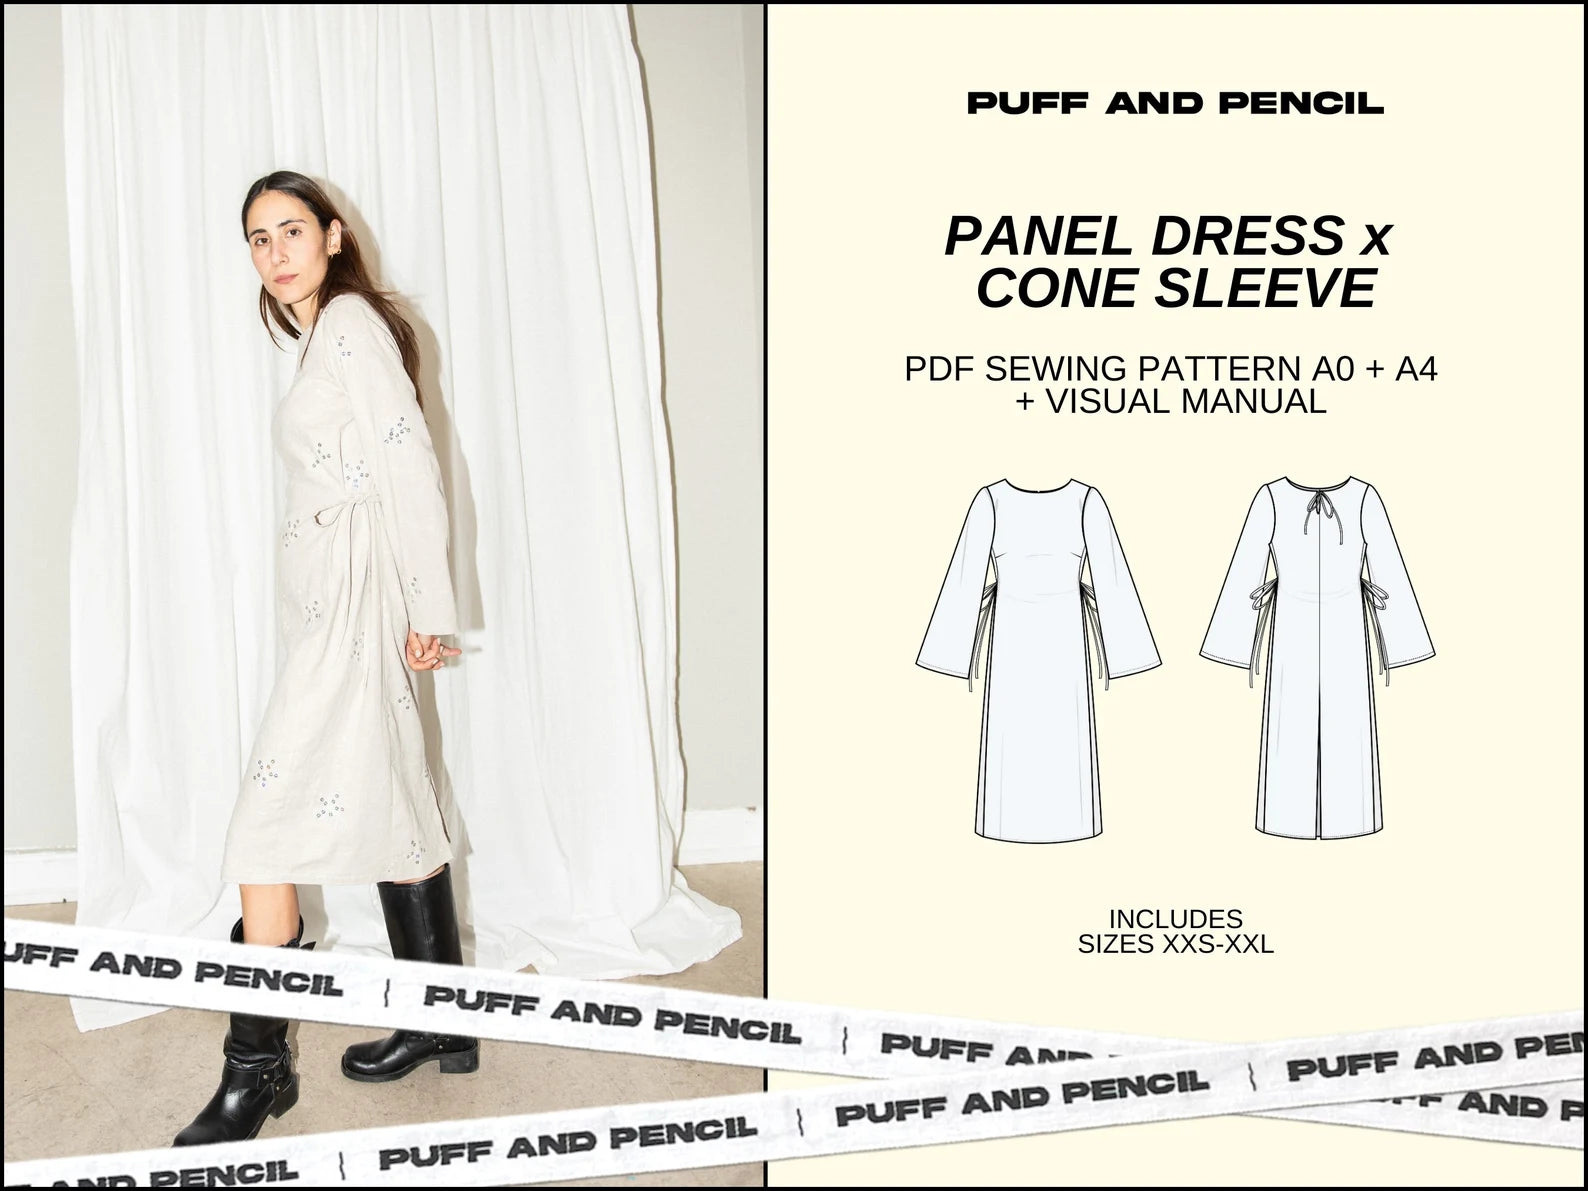 Puff and Pencil Panel Dress & Cone Sleeve